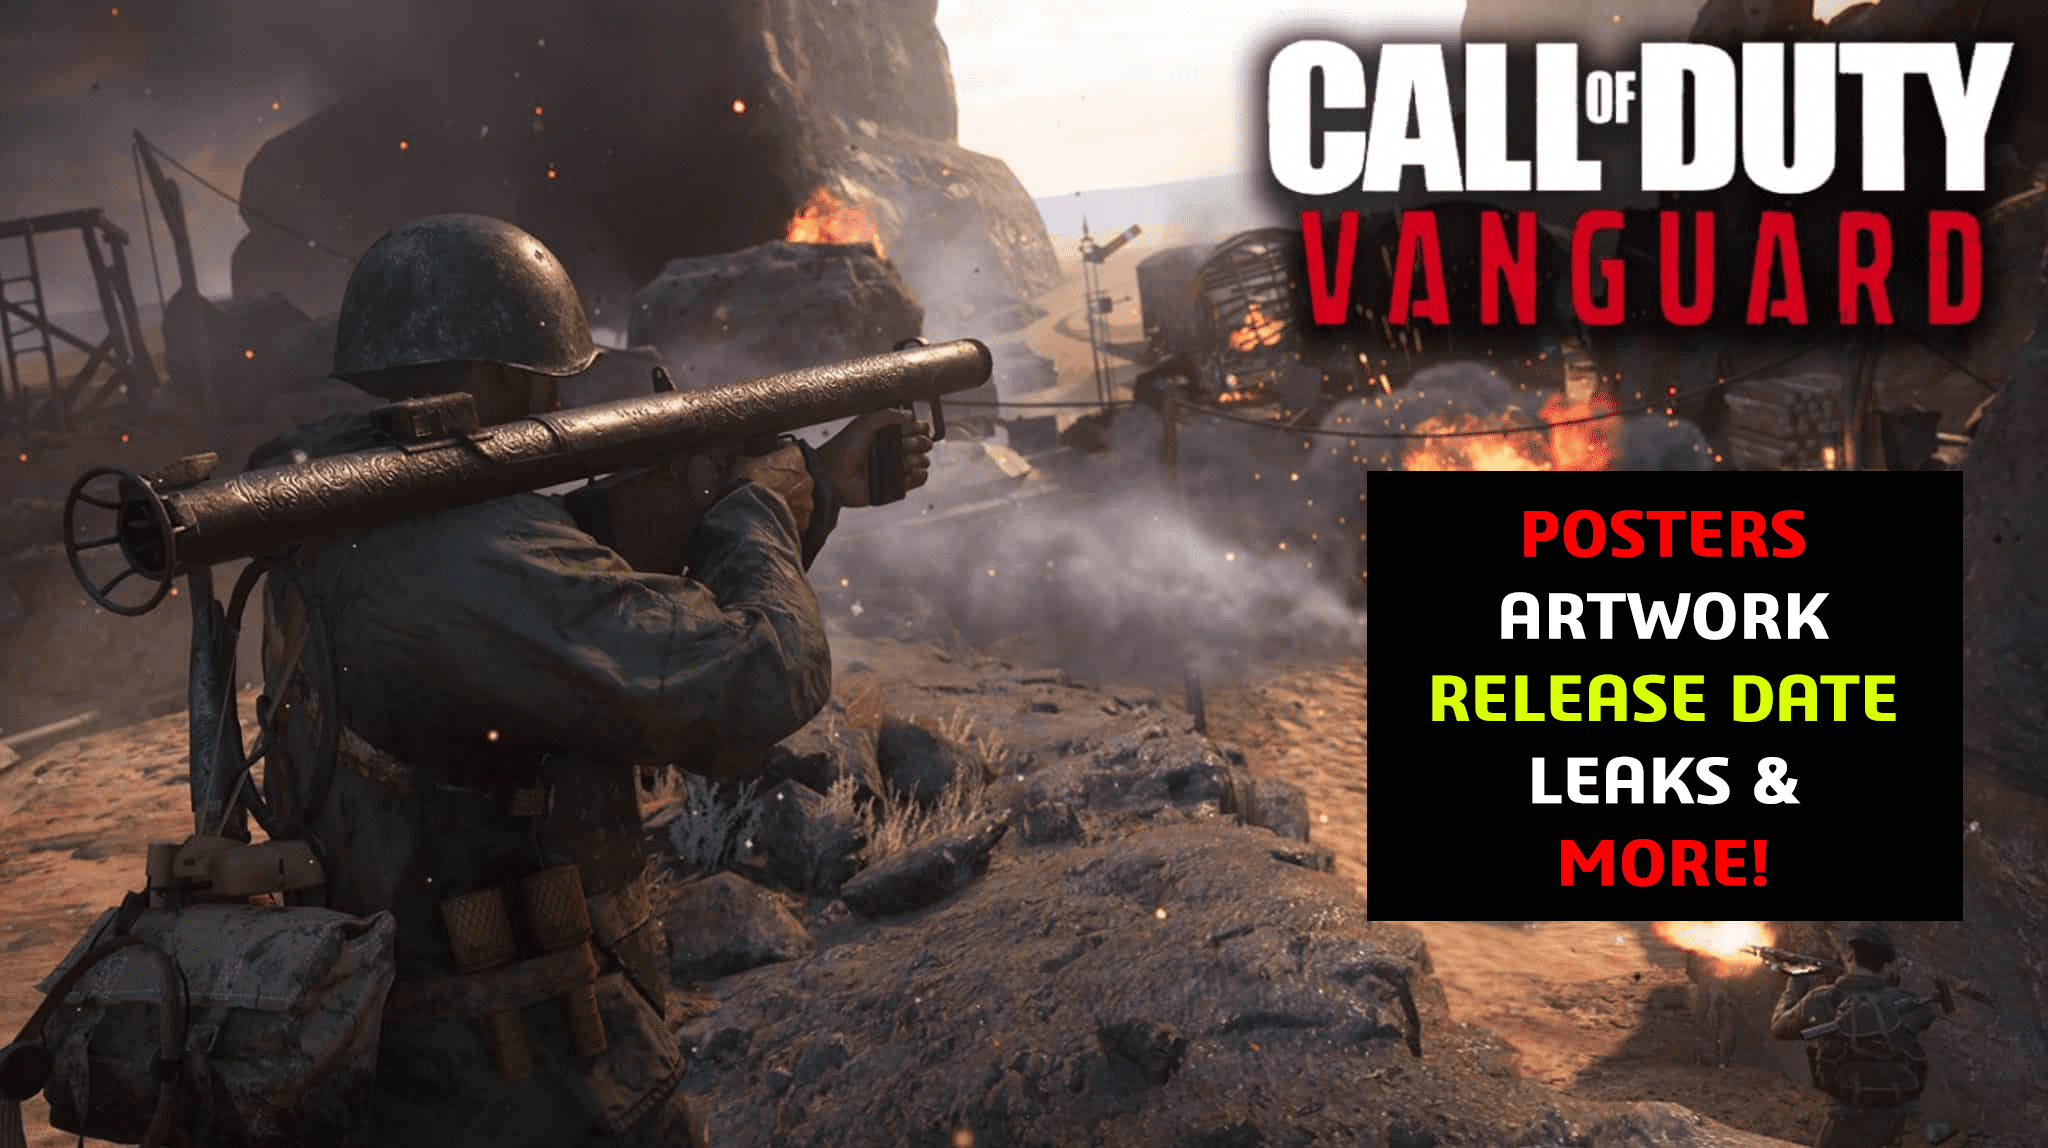 Call of Duty: Vanguard Posters, Artwork, Release and More!